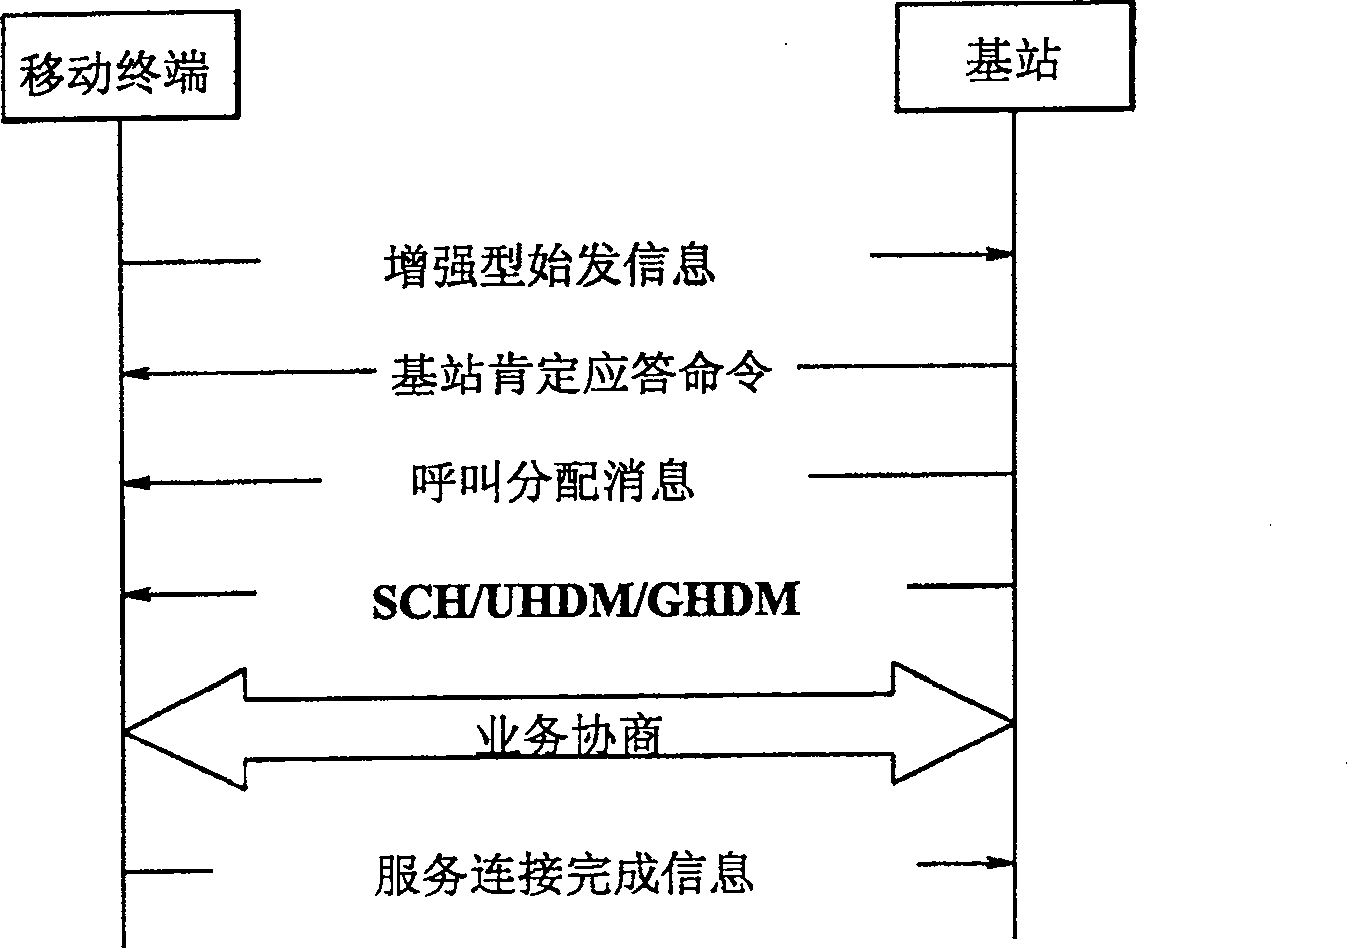 Speech and data synchro-transmitting in moble communication system